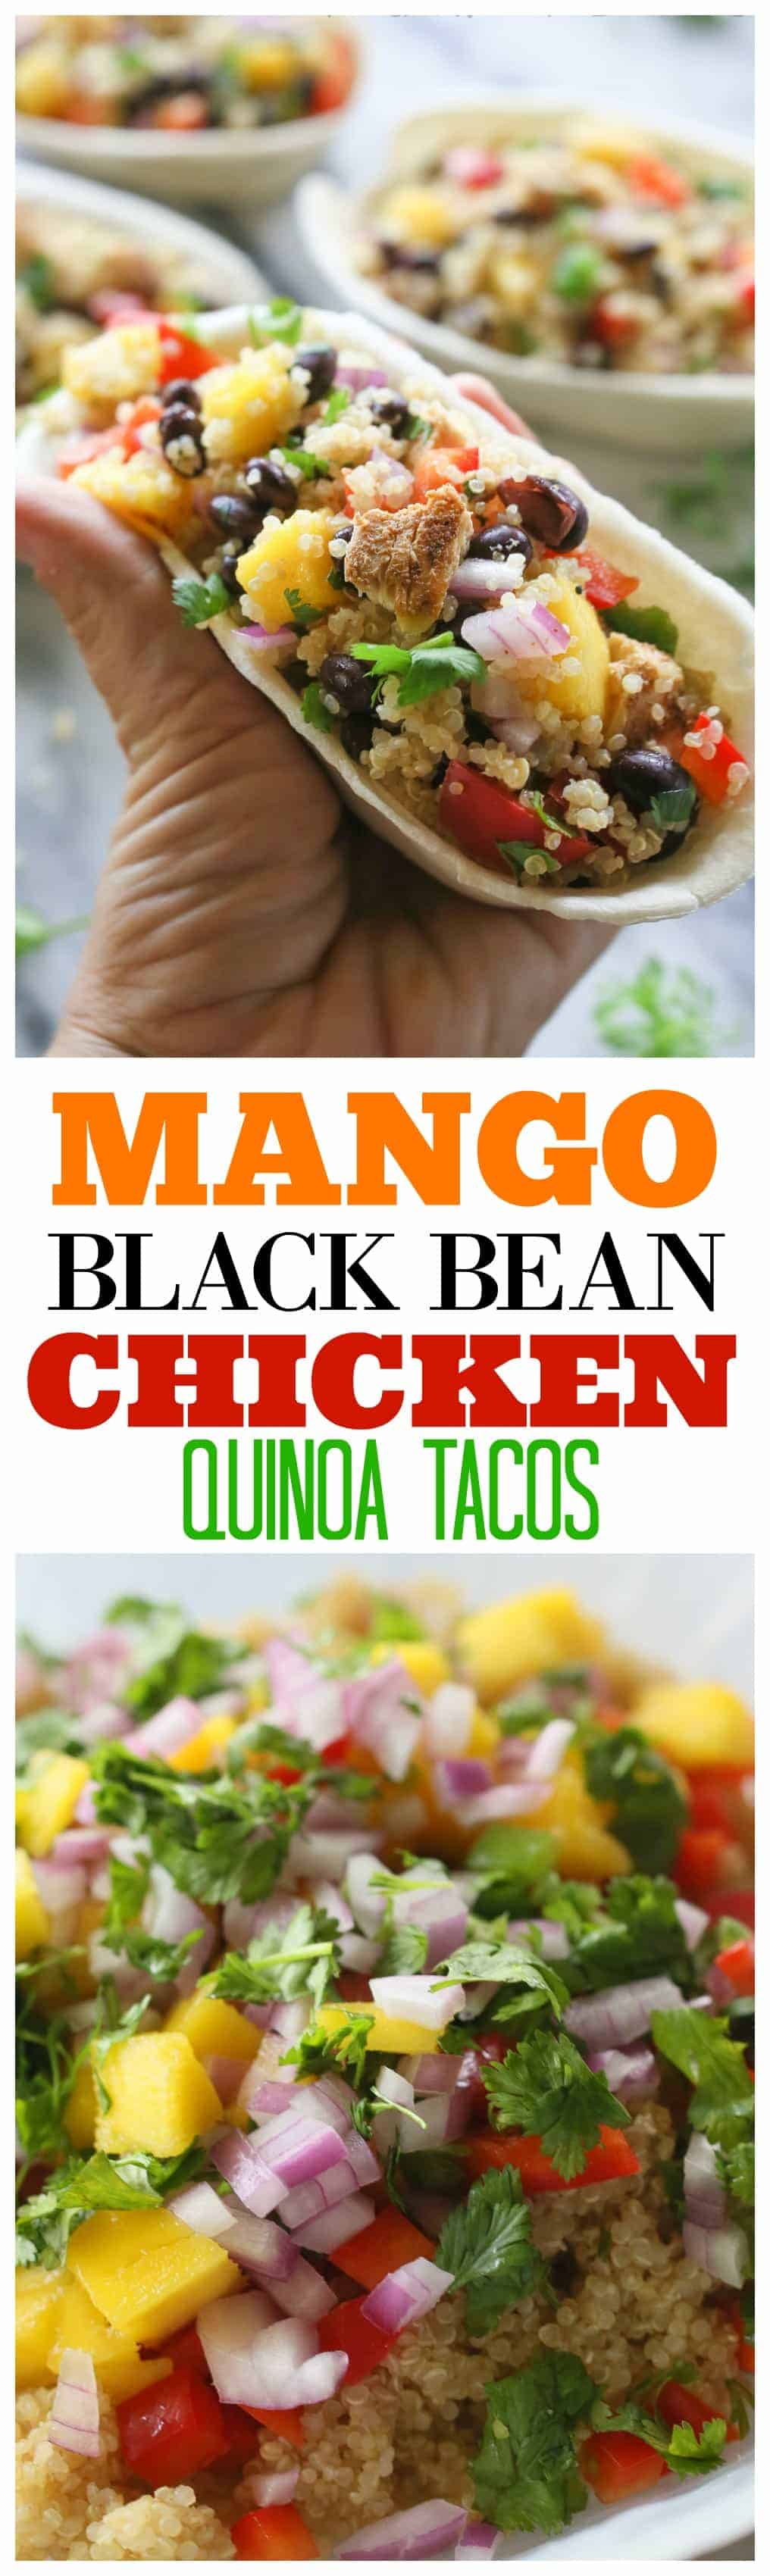 Mango Black Bean Chicken Quinoa Bowls are healthy and fresh, filled with vibrant veggies and fruit. It can be eaten warm or cold served in flour tortillas. #healthy #mango #black #bean #chicken #quinoa #bowls